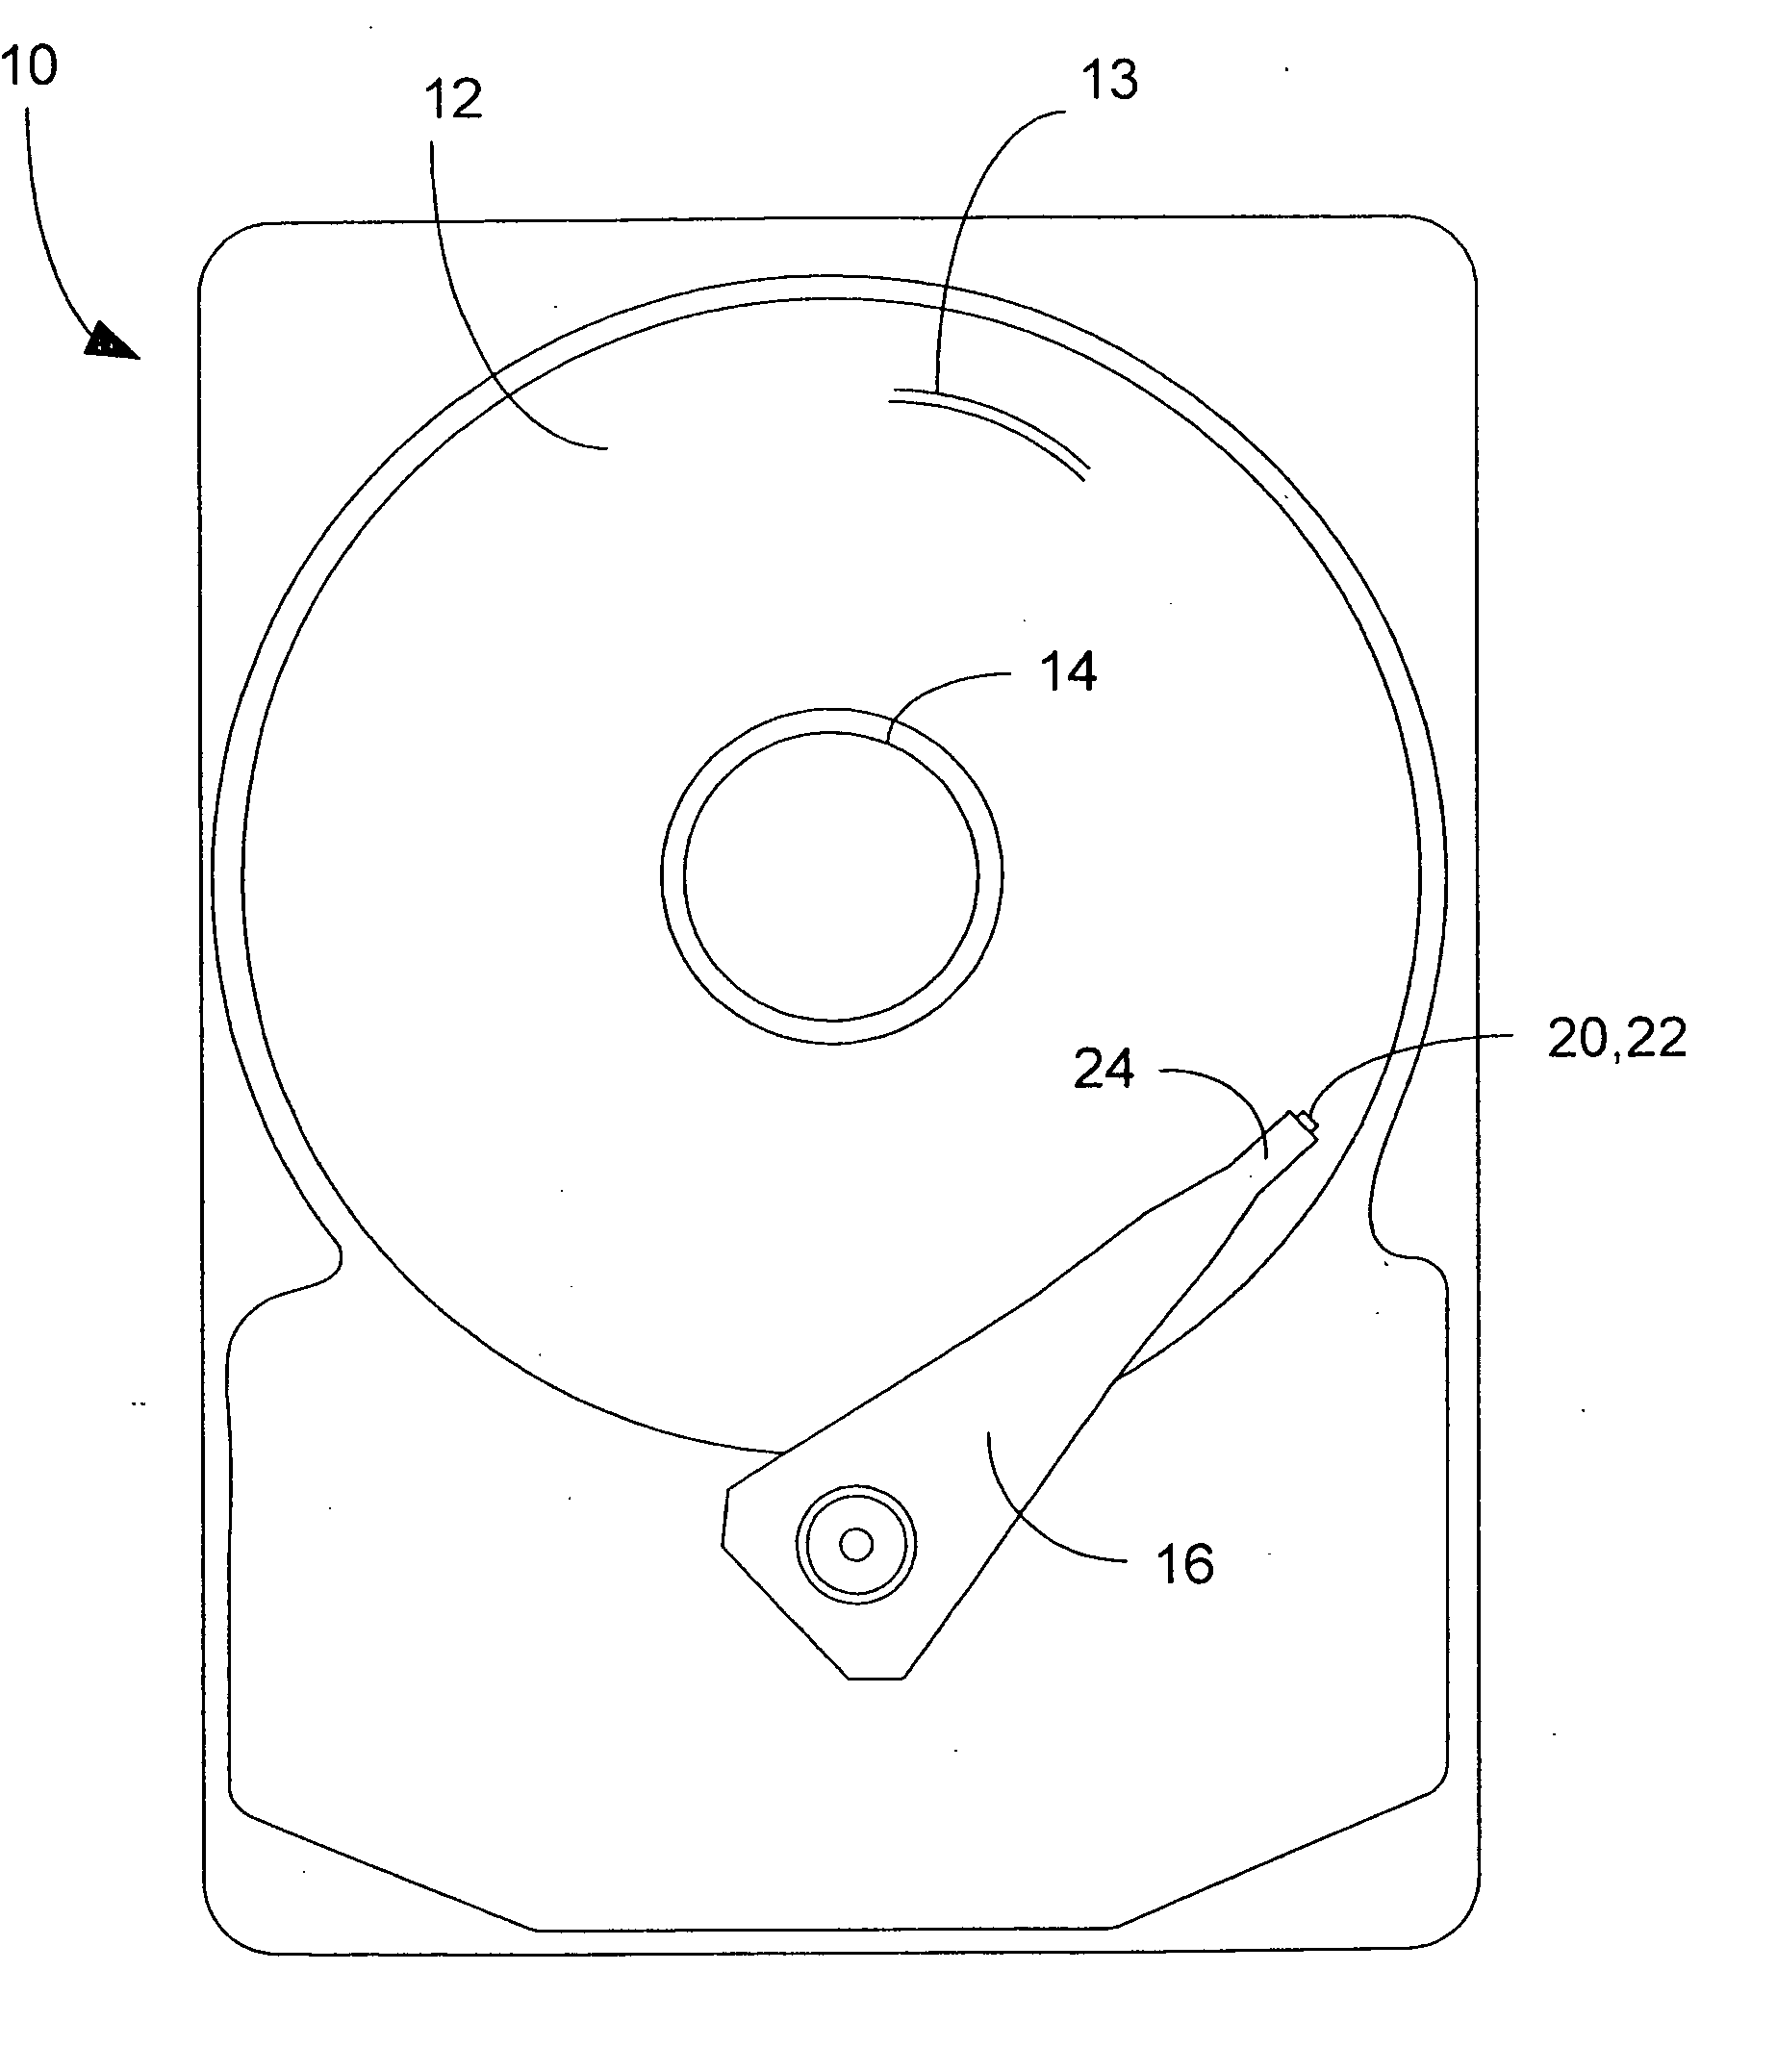 Method for fabricating magnetic write pole for a magnetic head using an E-beam resist mask